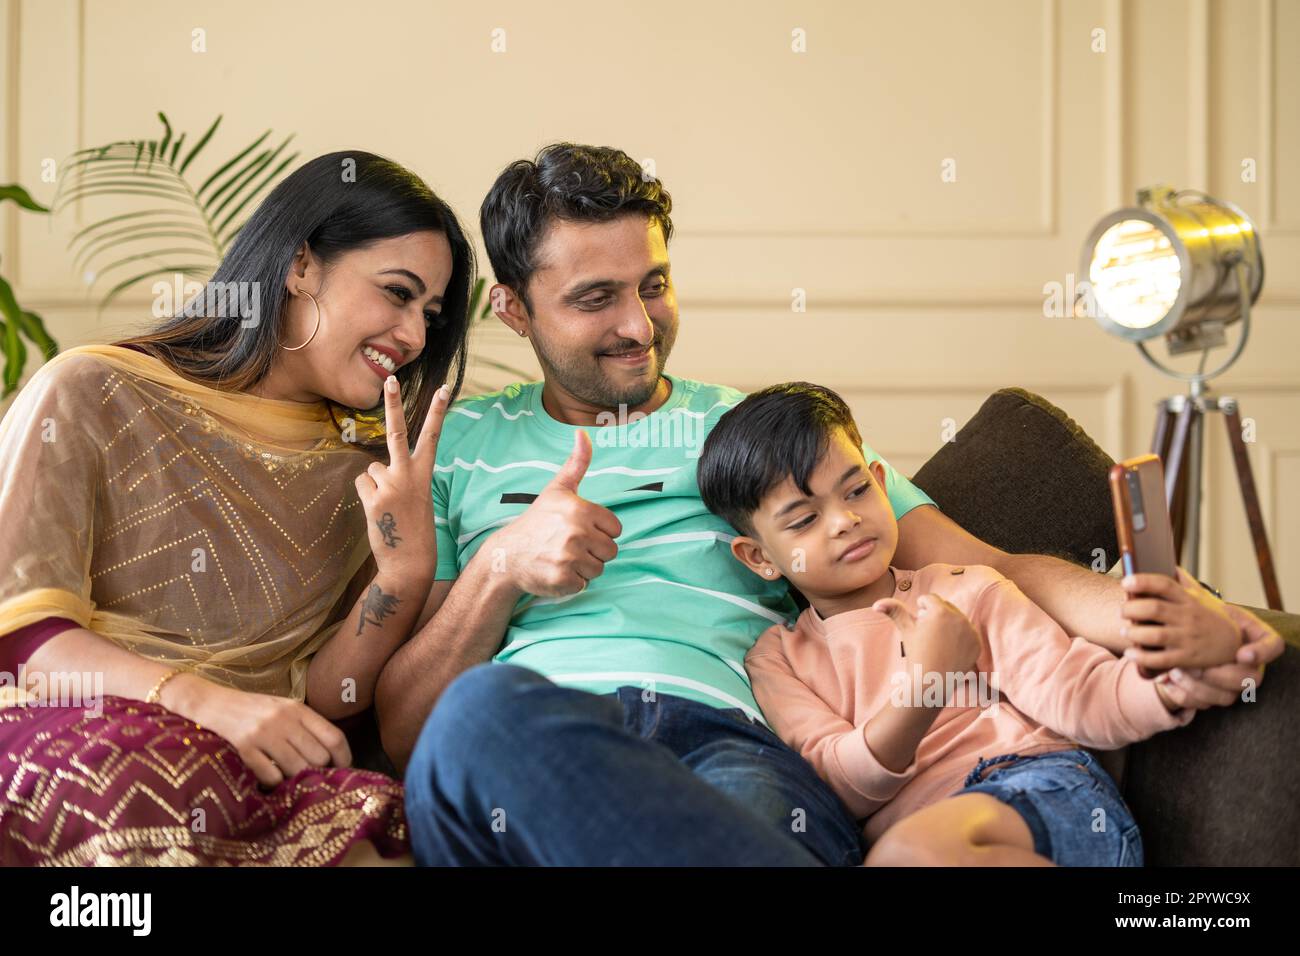 Happy realxed family with kid taking selfie on mobile phone while sitting on sofa at home - concepts of technology, togetherness and family bonding. Stock Photo